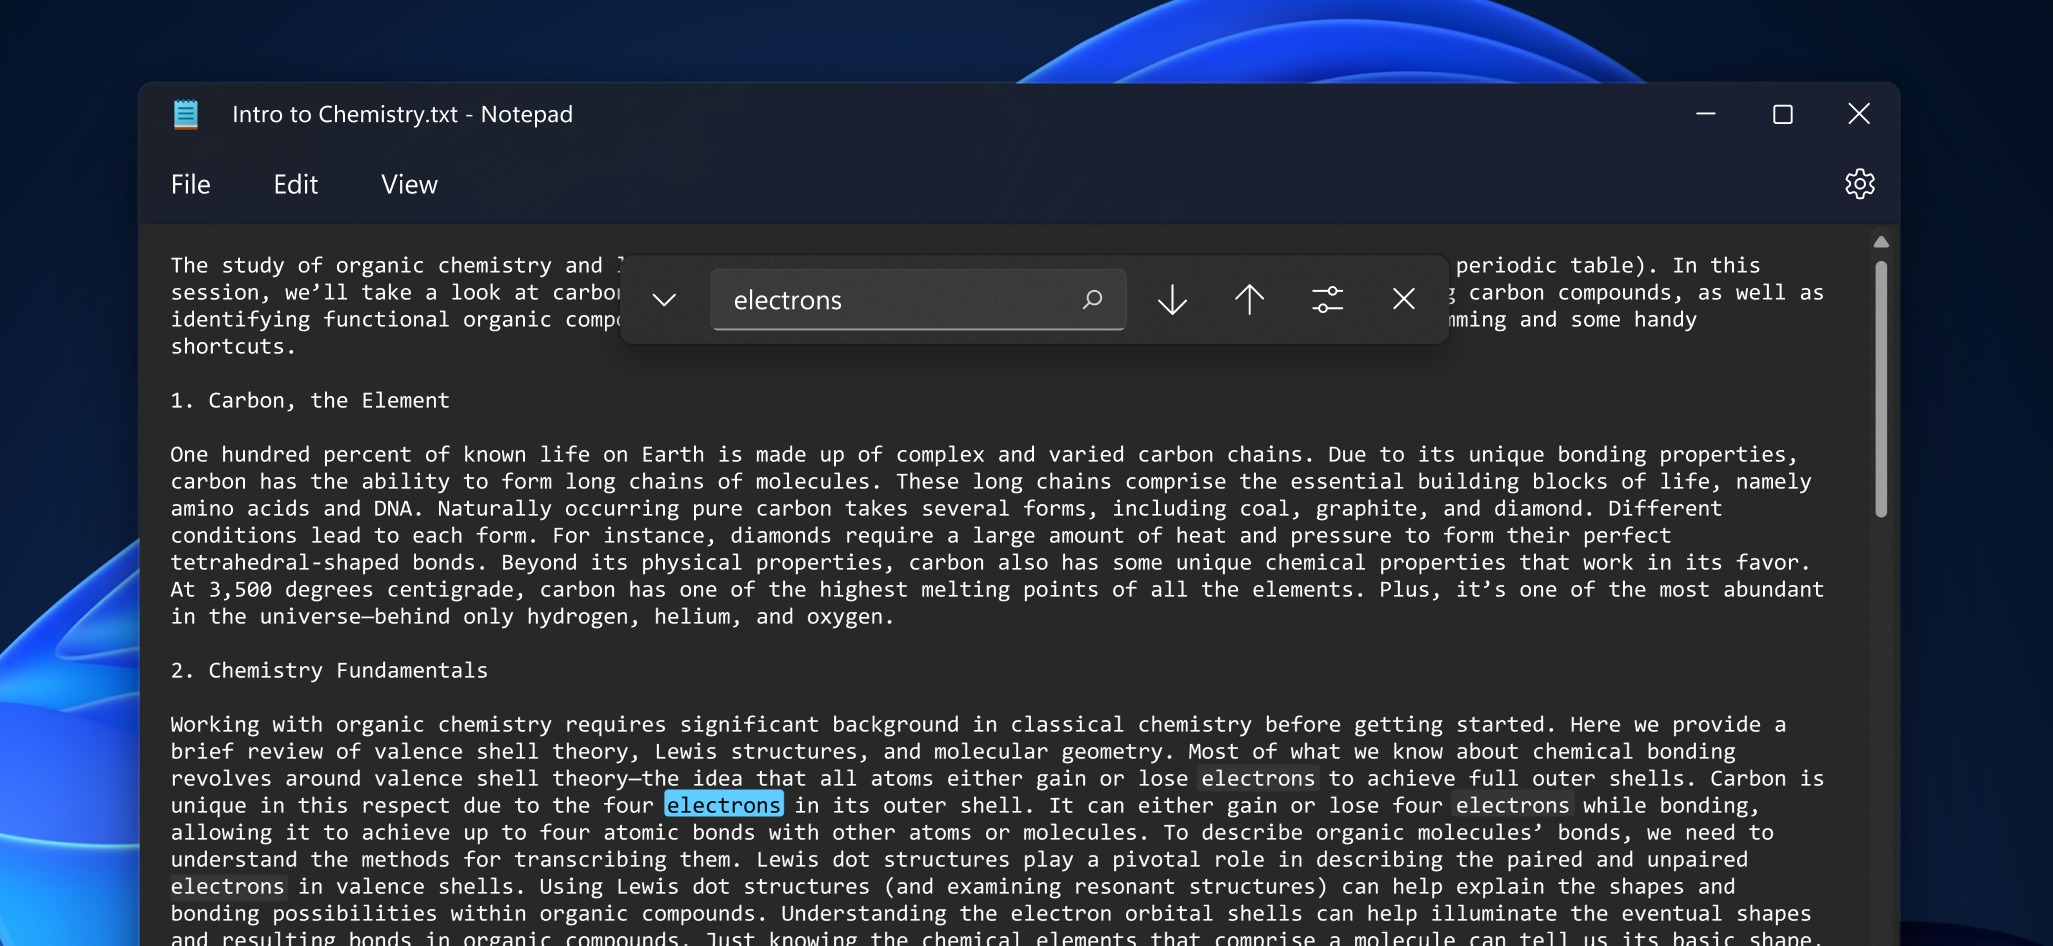 Microsoft updates Notepad with dark mode for Windows 11 Insiders